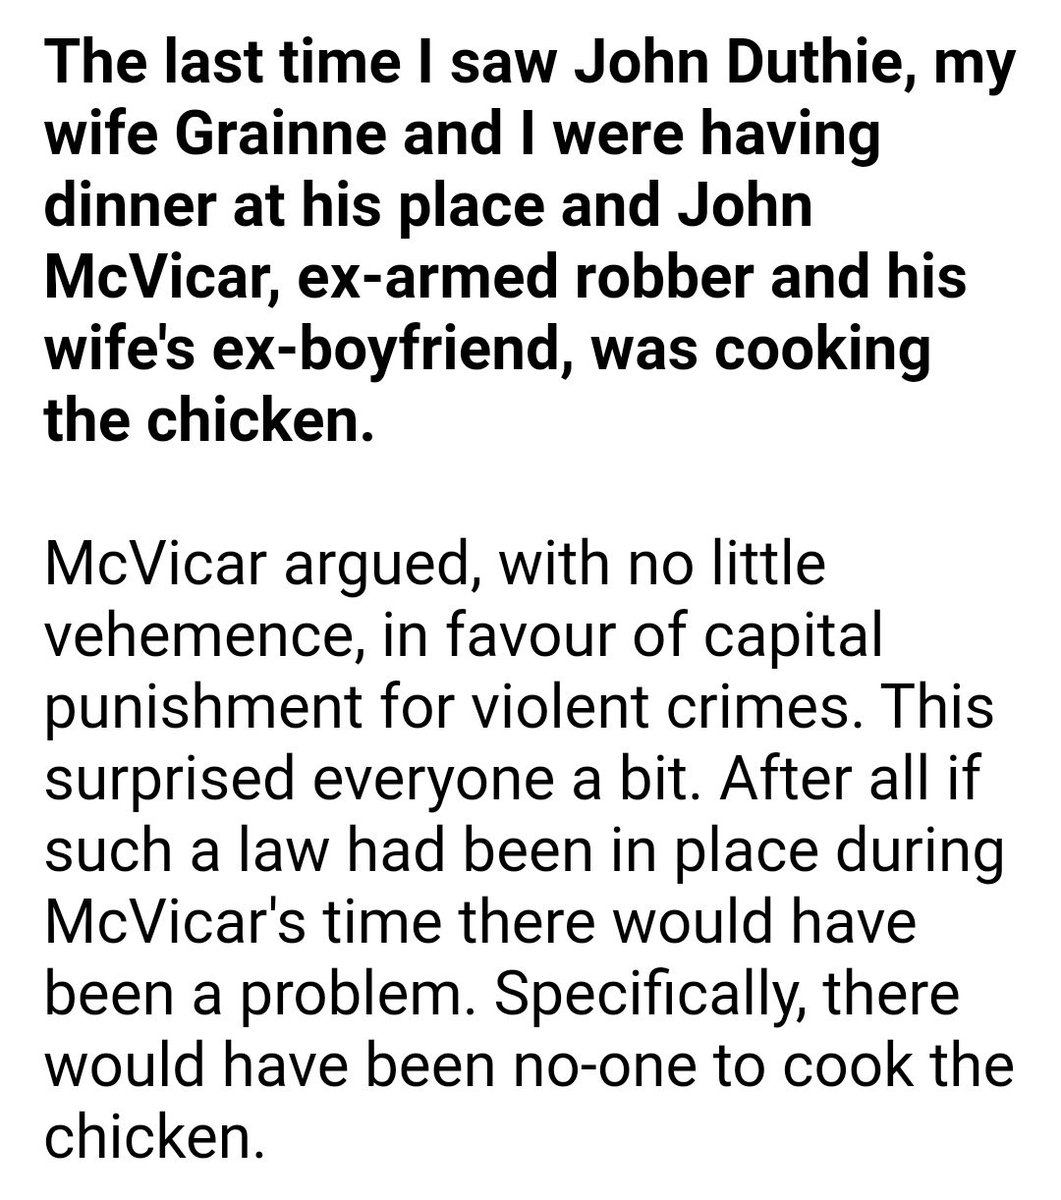 John Duthie, TV director and big name on the poker circuit, was a friend of John McVicar, convicted armed robber who escaped from prison several times. In 2002, McVicar published 'Dead on Time', a book about the Jill Dando murder.  https://www.theguardian.com/observer/sport/story/0,6903,403060,00.html https://www.express.co.uk/news/uk/490169/Dando-alarm-paedophile-ring-BBC